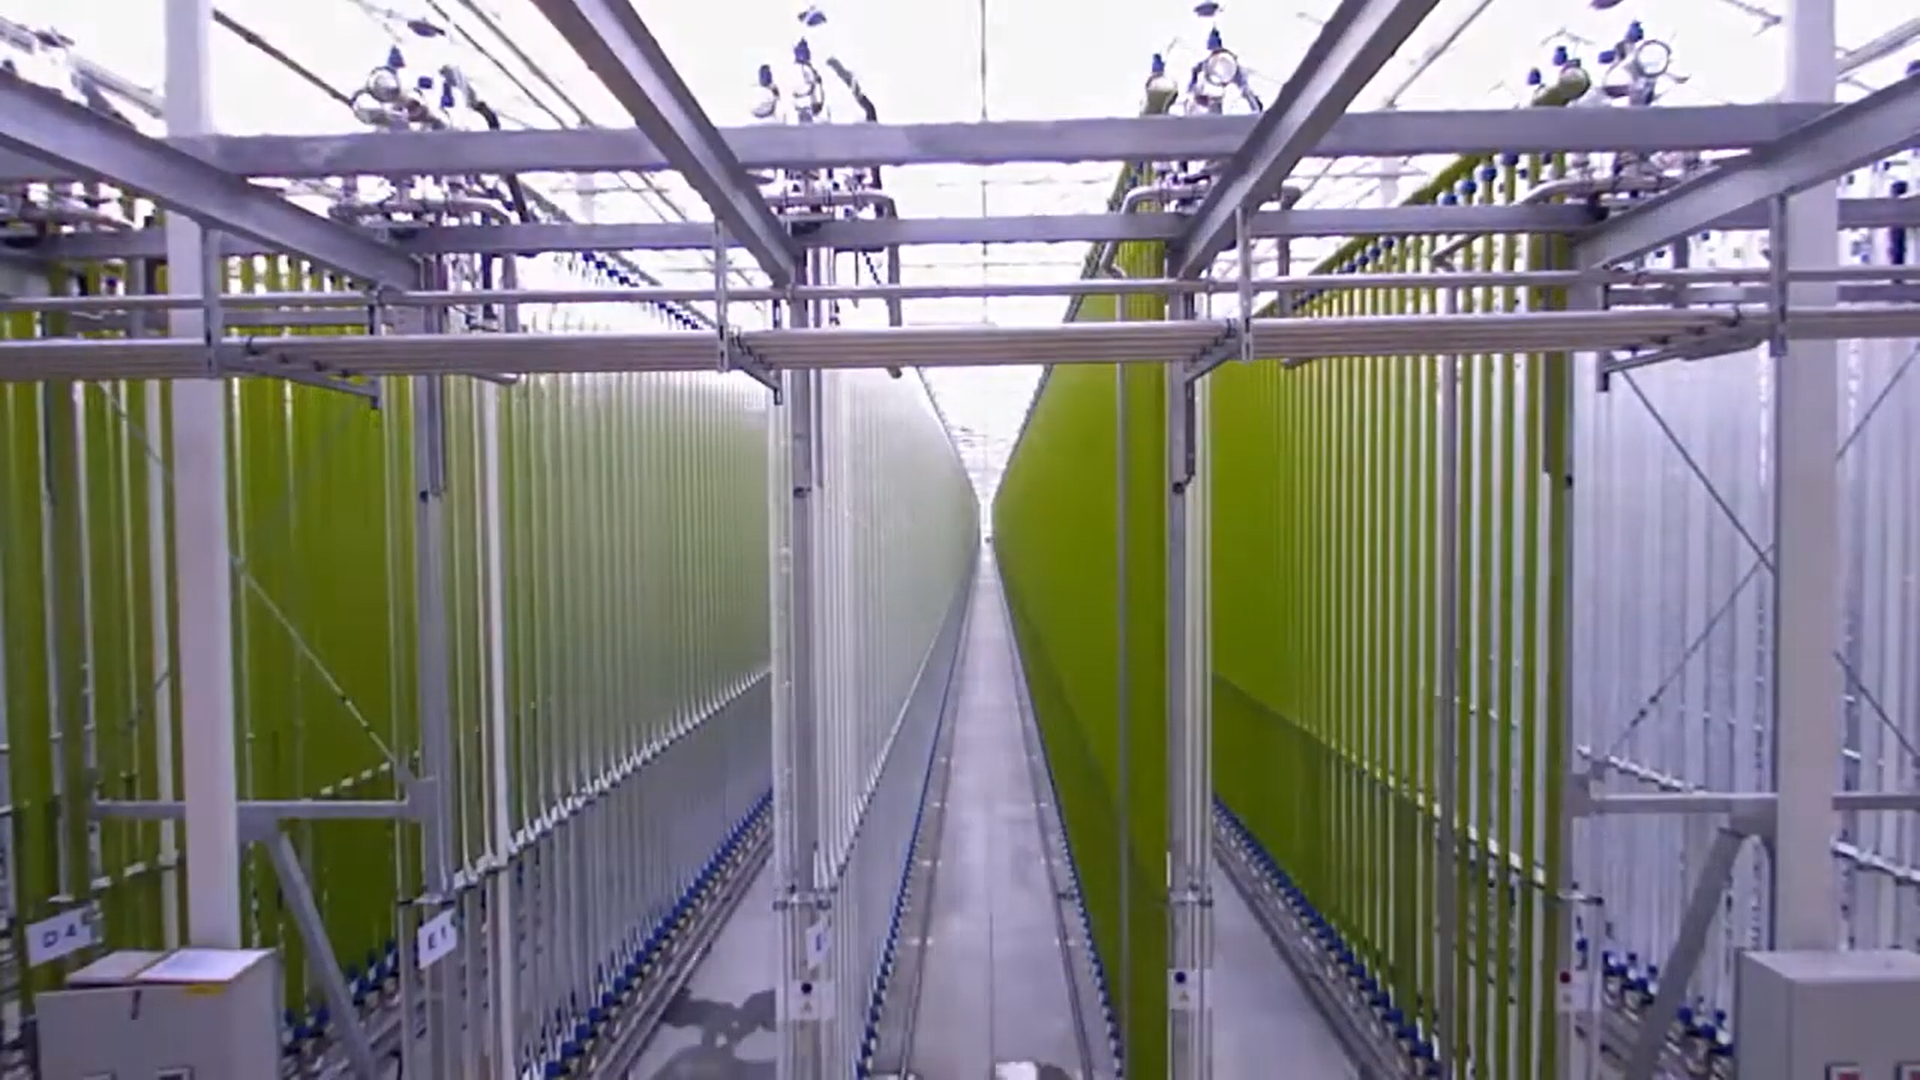 Watch a time-lapse video of the construction of Jongerius ecoduna's microalgae cultivation plant